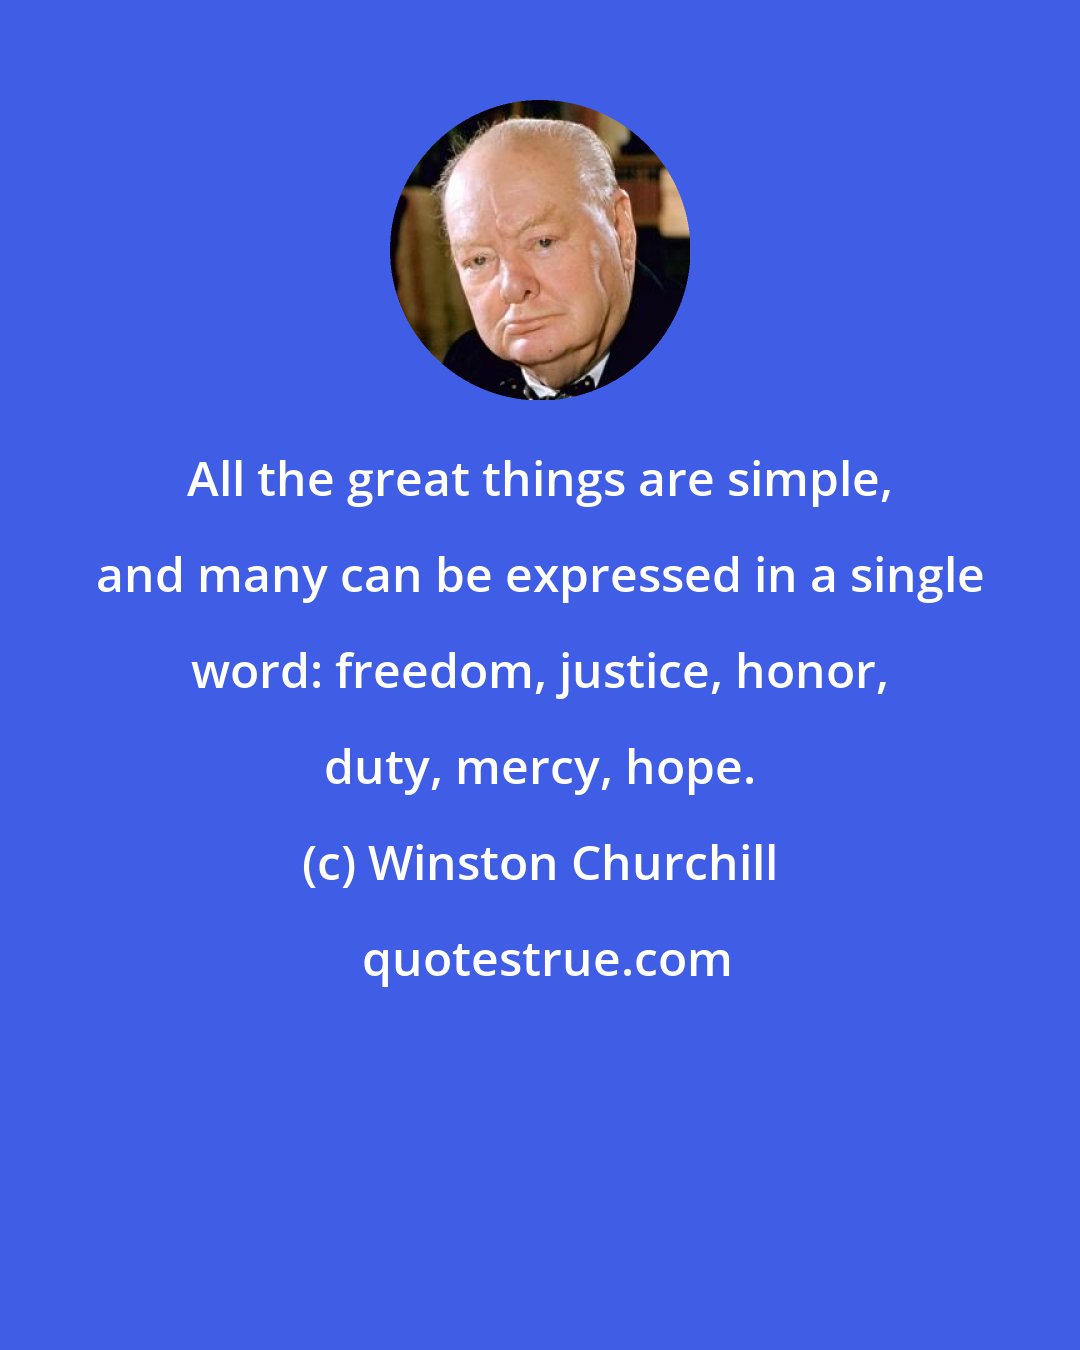 Winston Churchill: All the great things are simple, and many can be expressed in a single word: freedom, justice, honor, duty, mercy, hope.